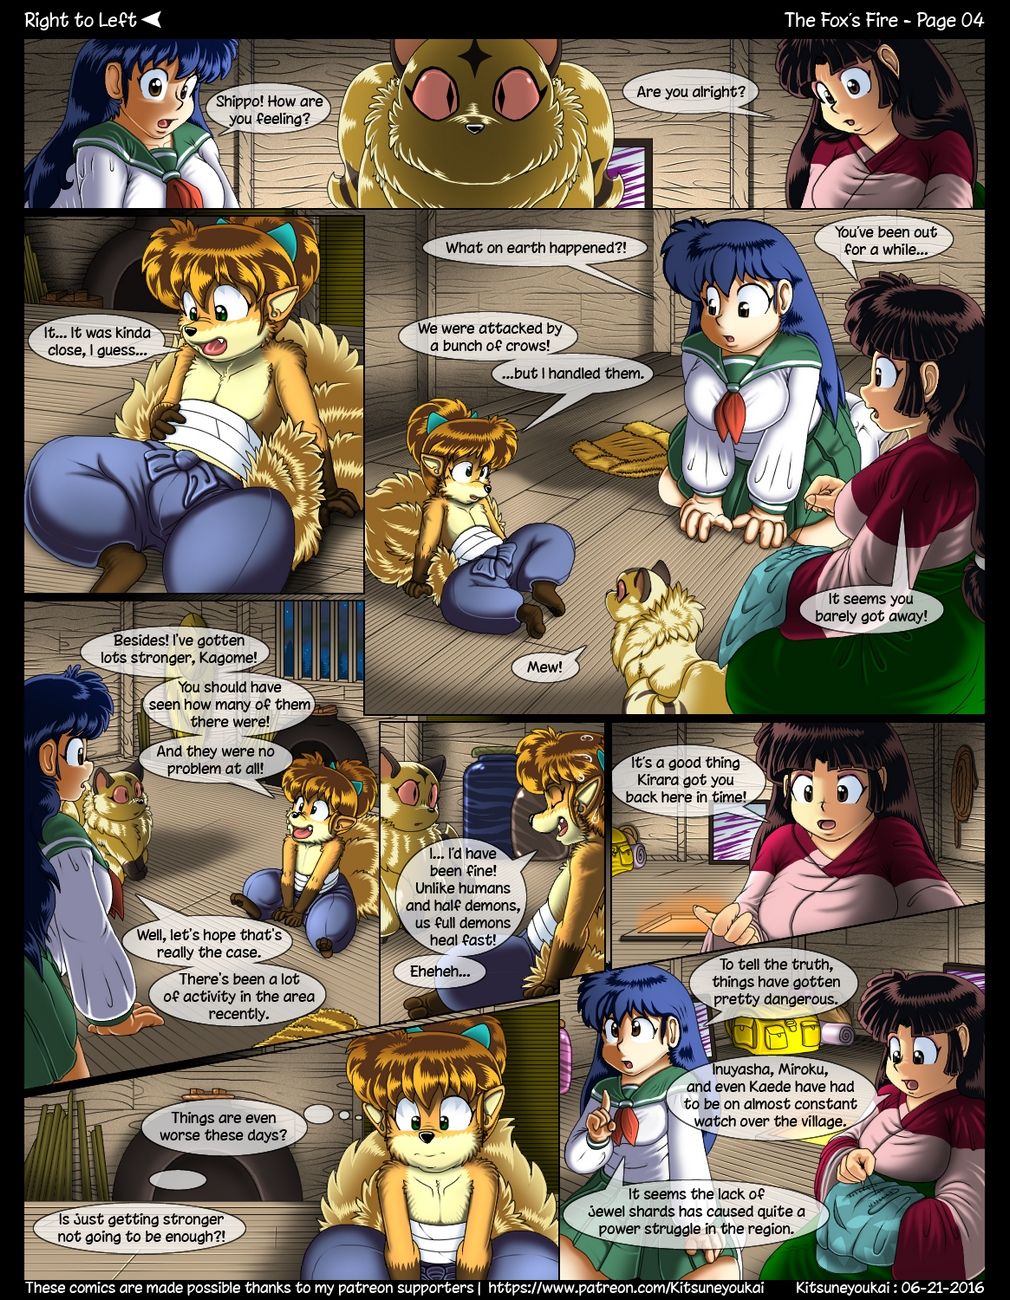 The Fox's Inner Fire (Furry) page 5